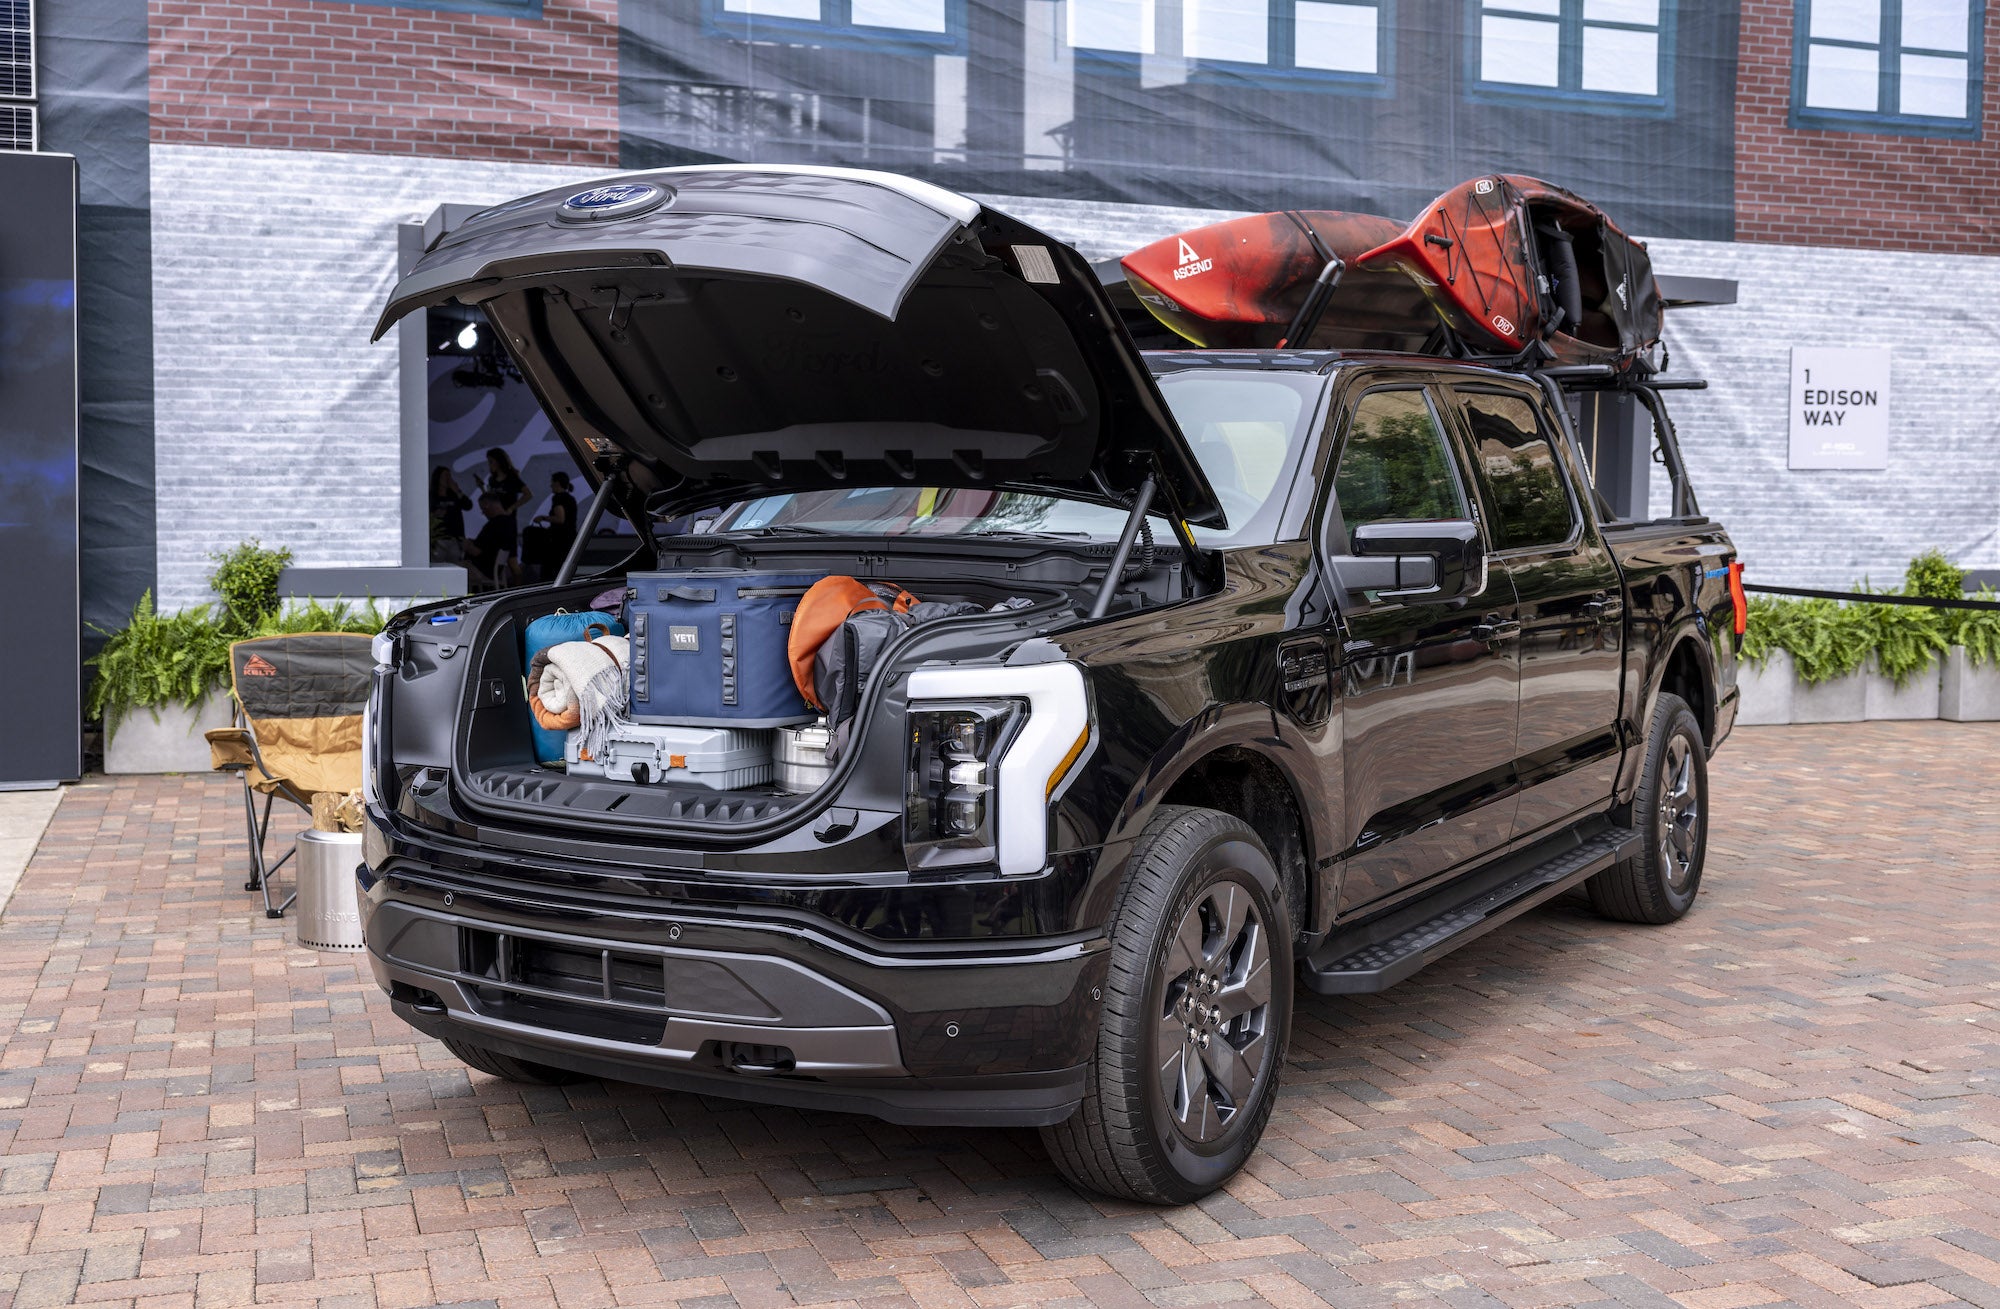 “If you think that is easy, think again,” a Ford executive said, regarding the creation of the trunk storage space. 